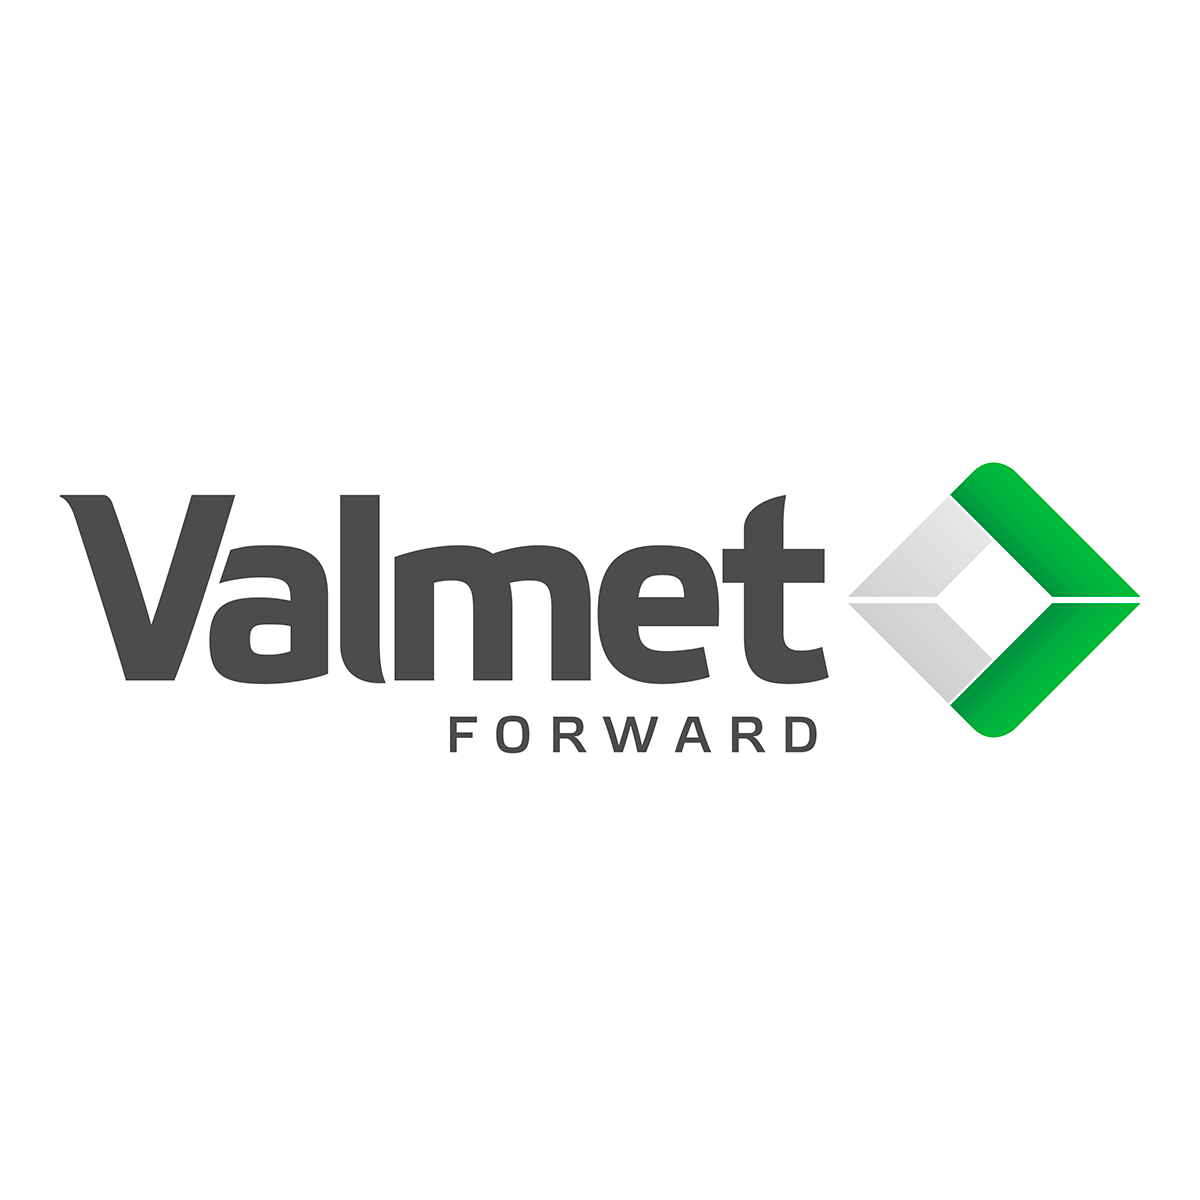 Portuguese Corporation Tech Logo - Valmet: technologies, services and automation to pulp, energy and ...